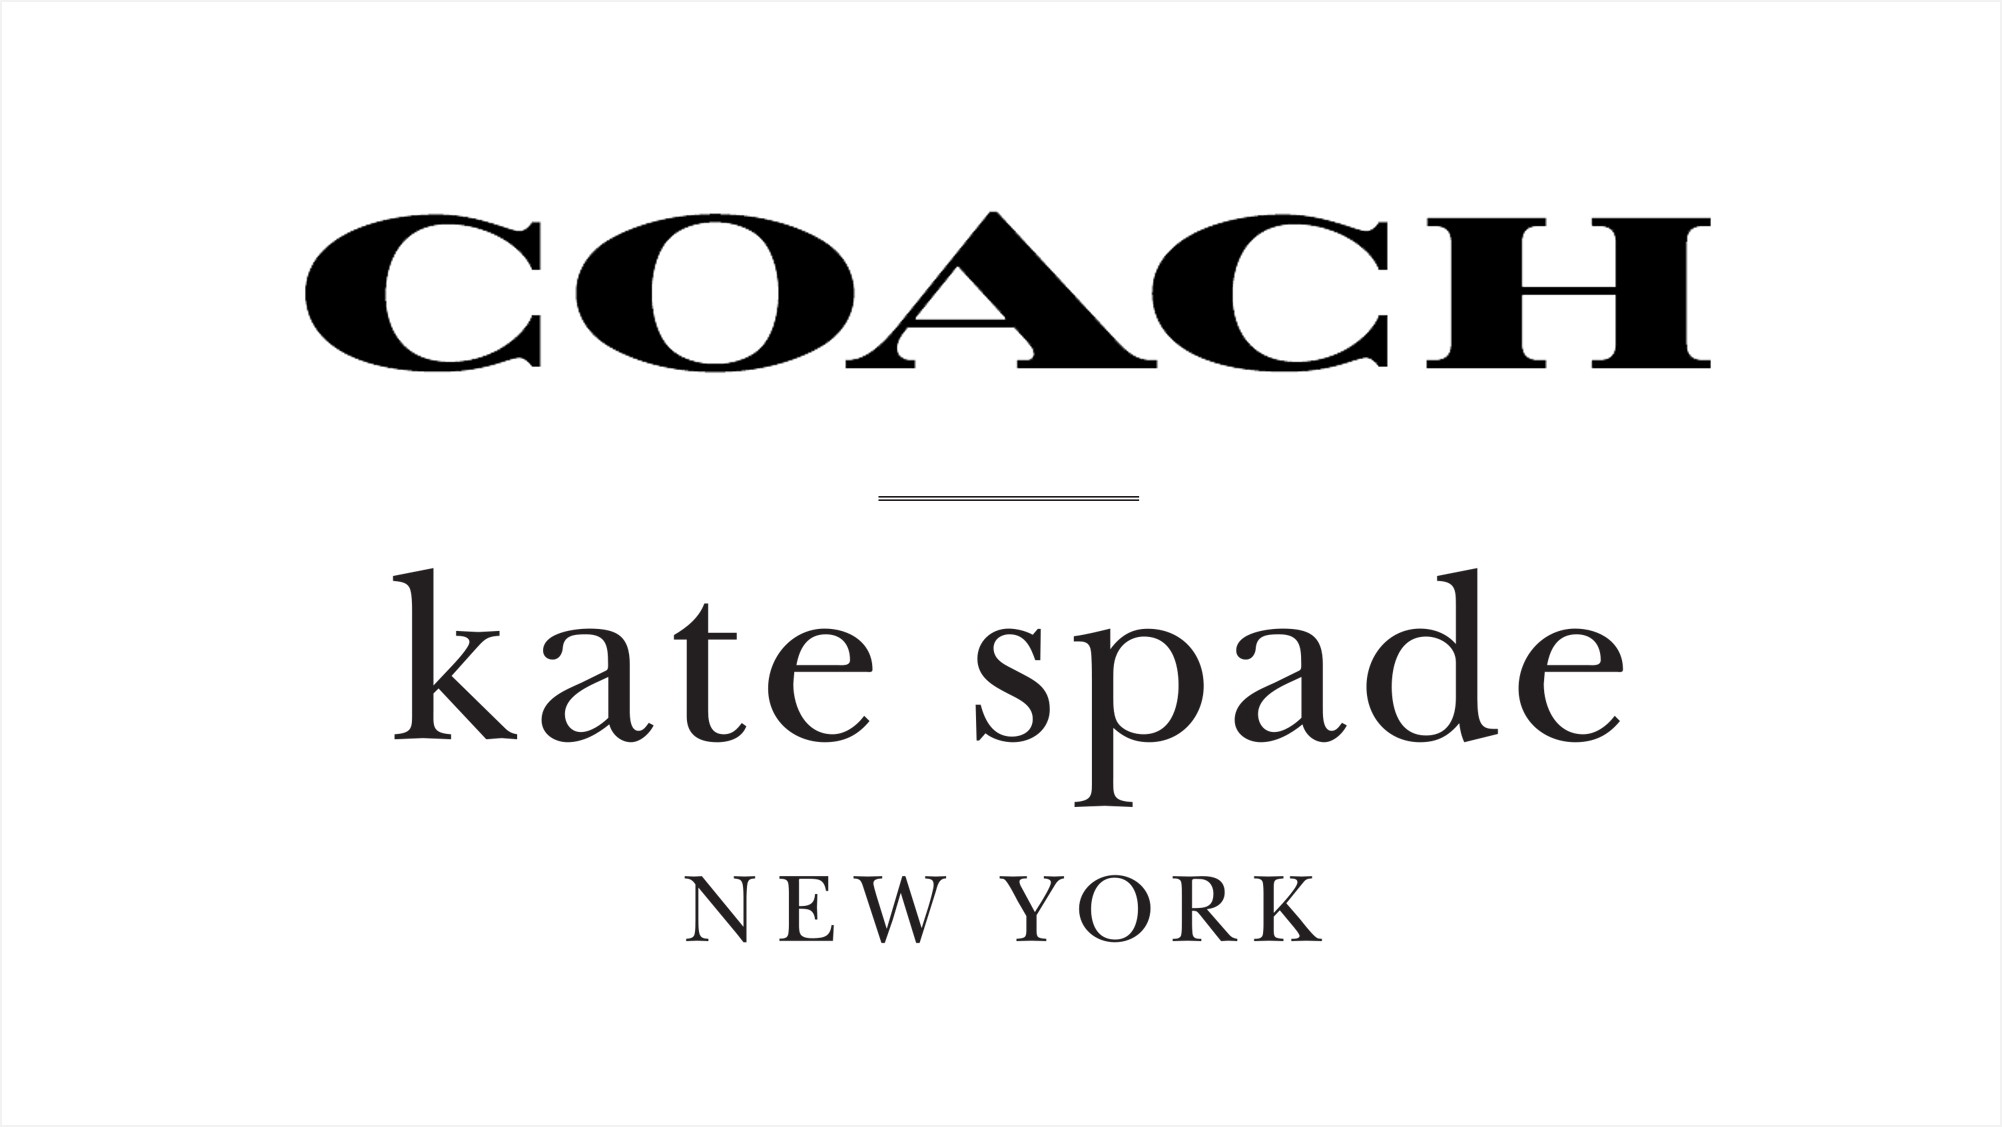 Coach's bling fling, will spend $ on Kate Spade